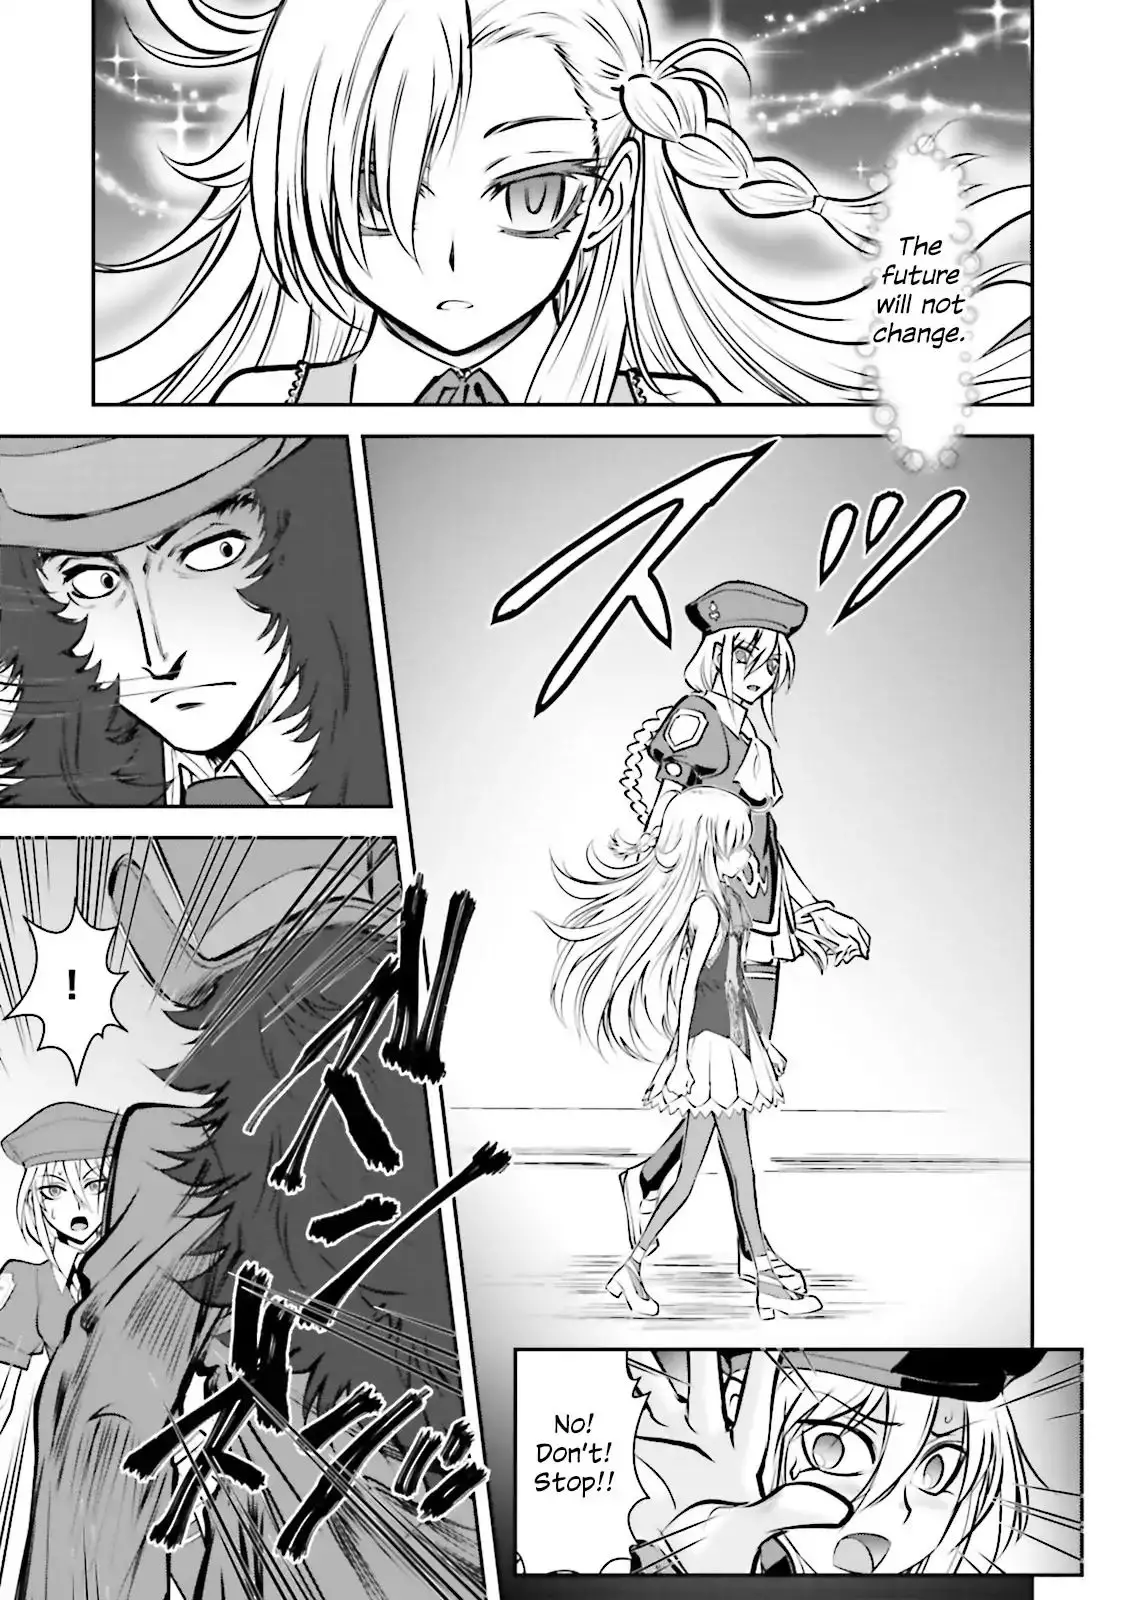 Melty Blood - Back Alley Alliance Nightmare - 5 page 21